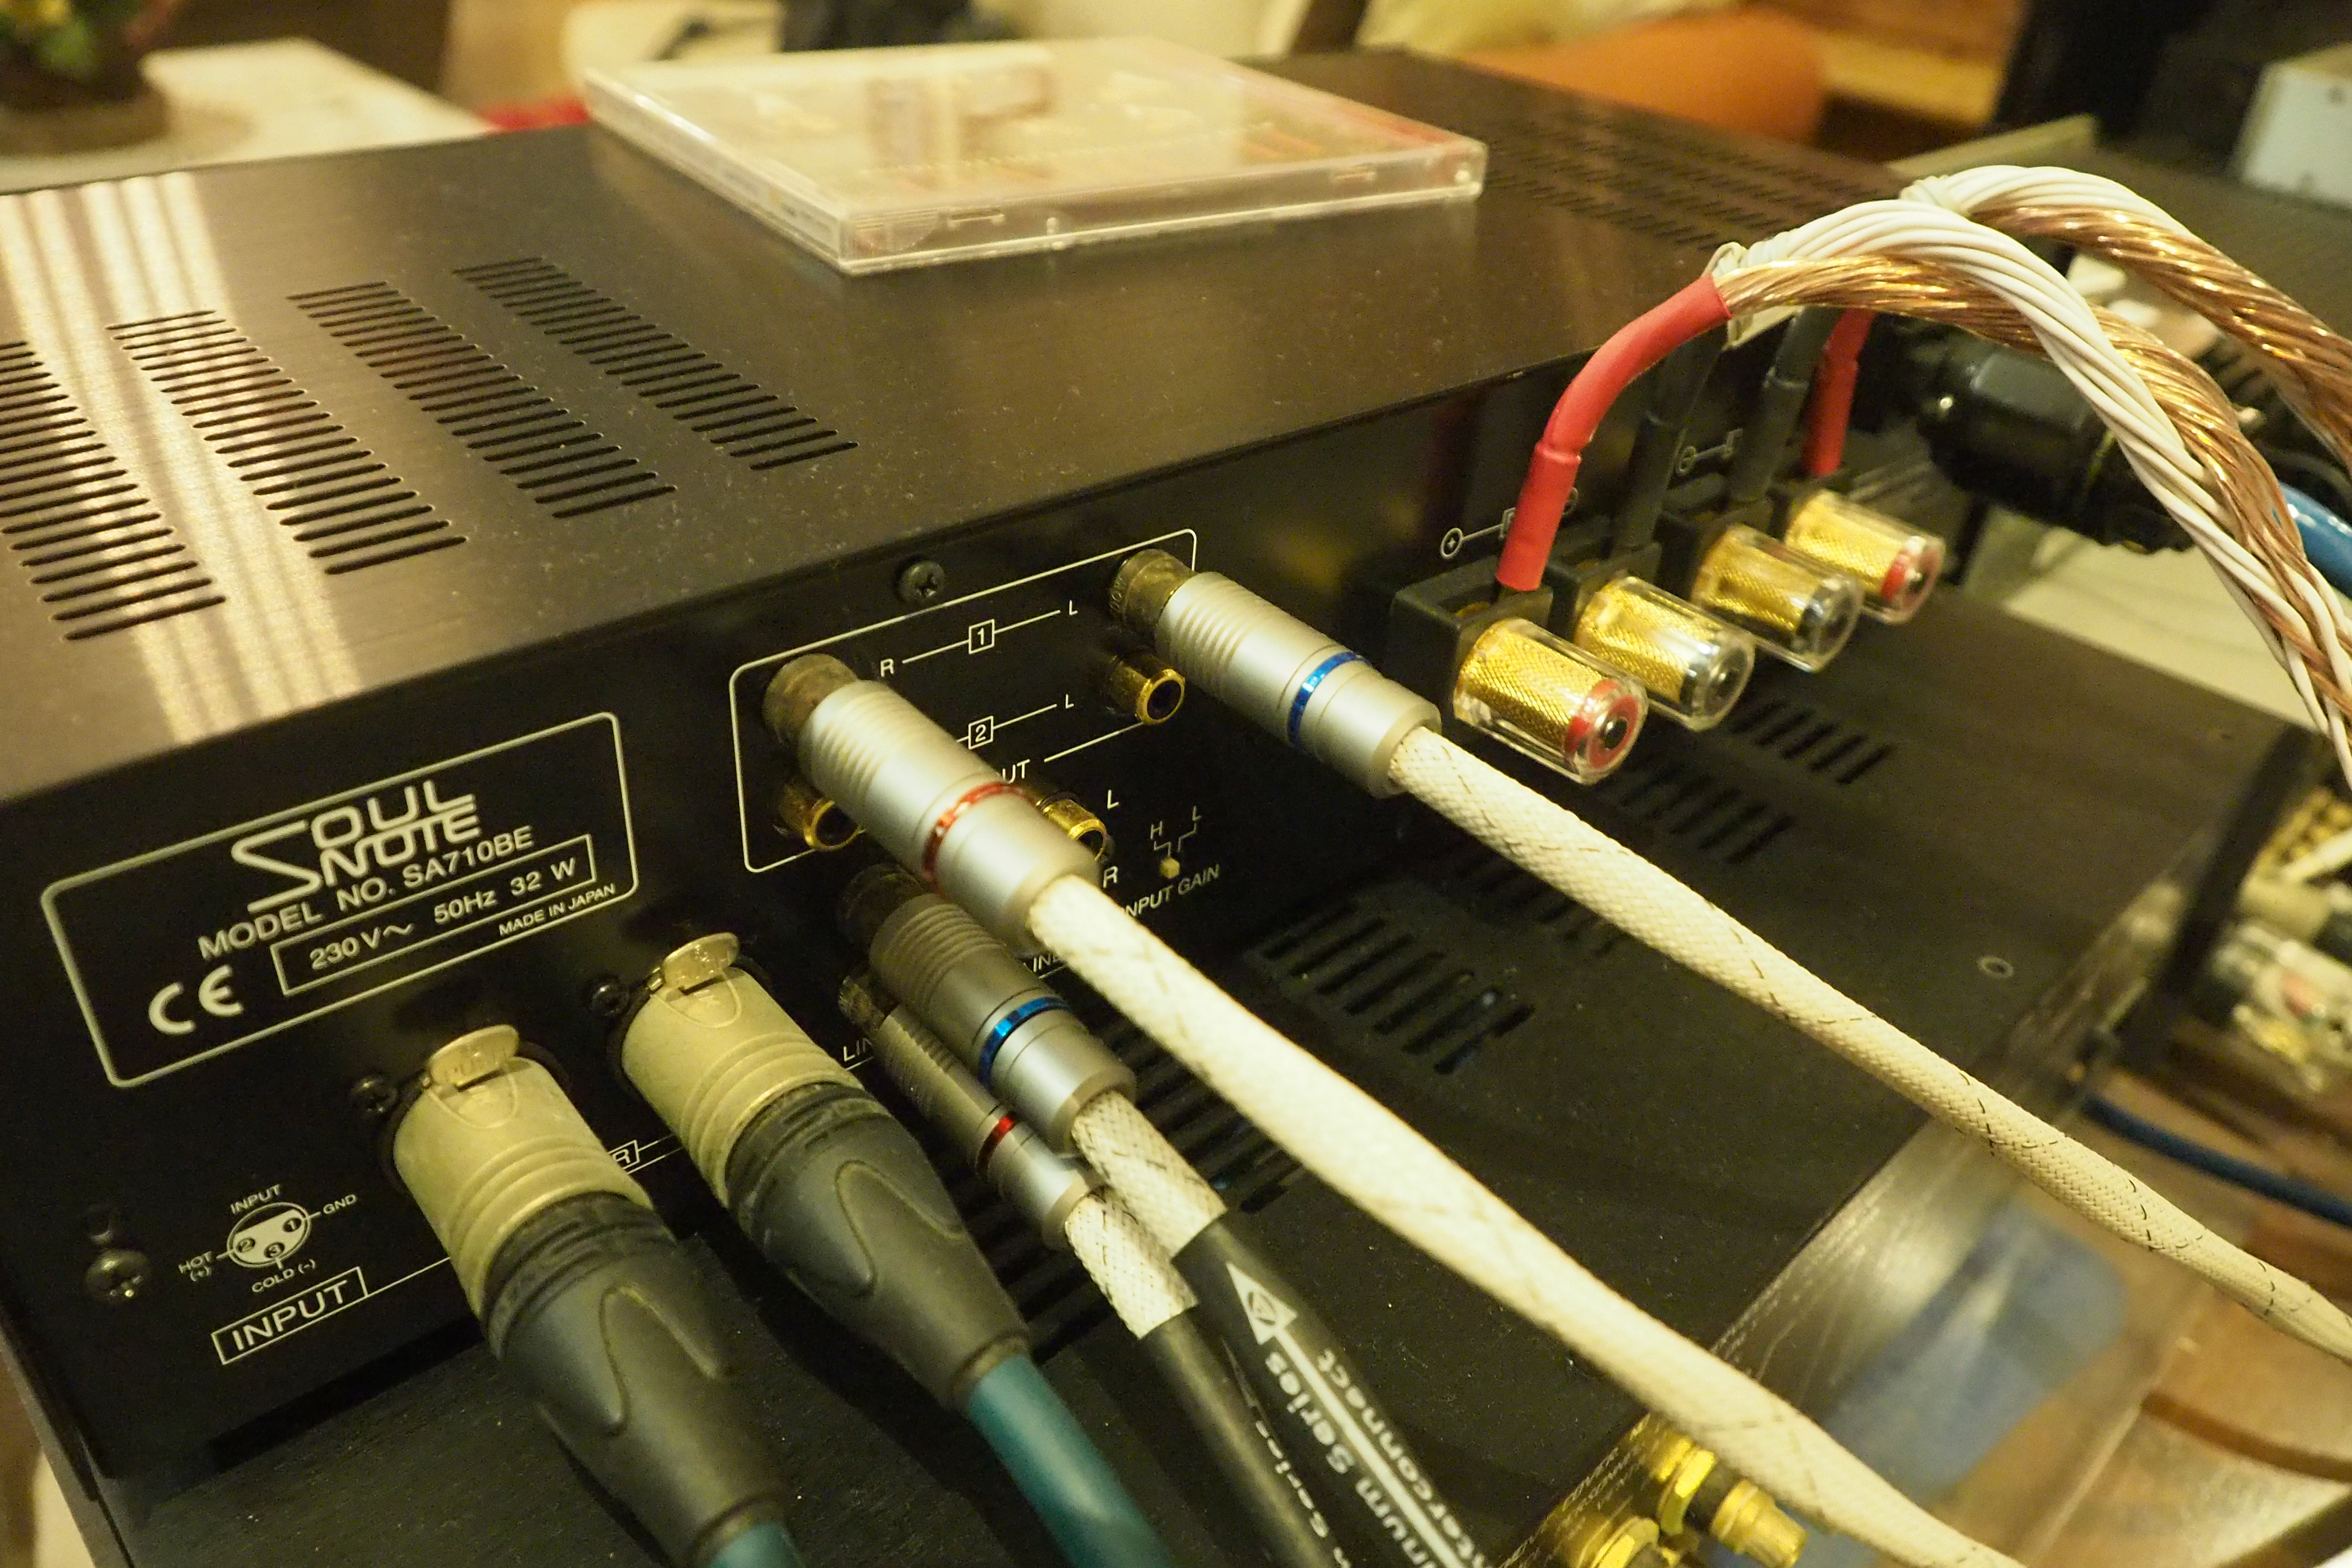 The rear panel is quite neat despite the more-than-usual number of inputs and outputs.